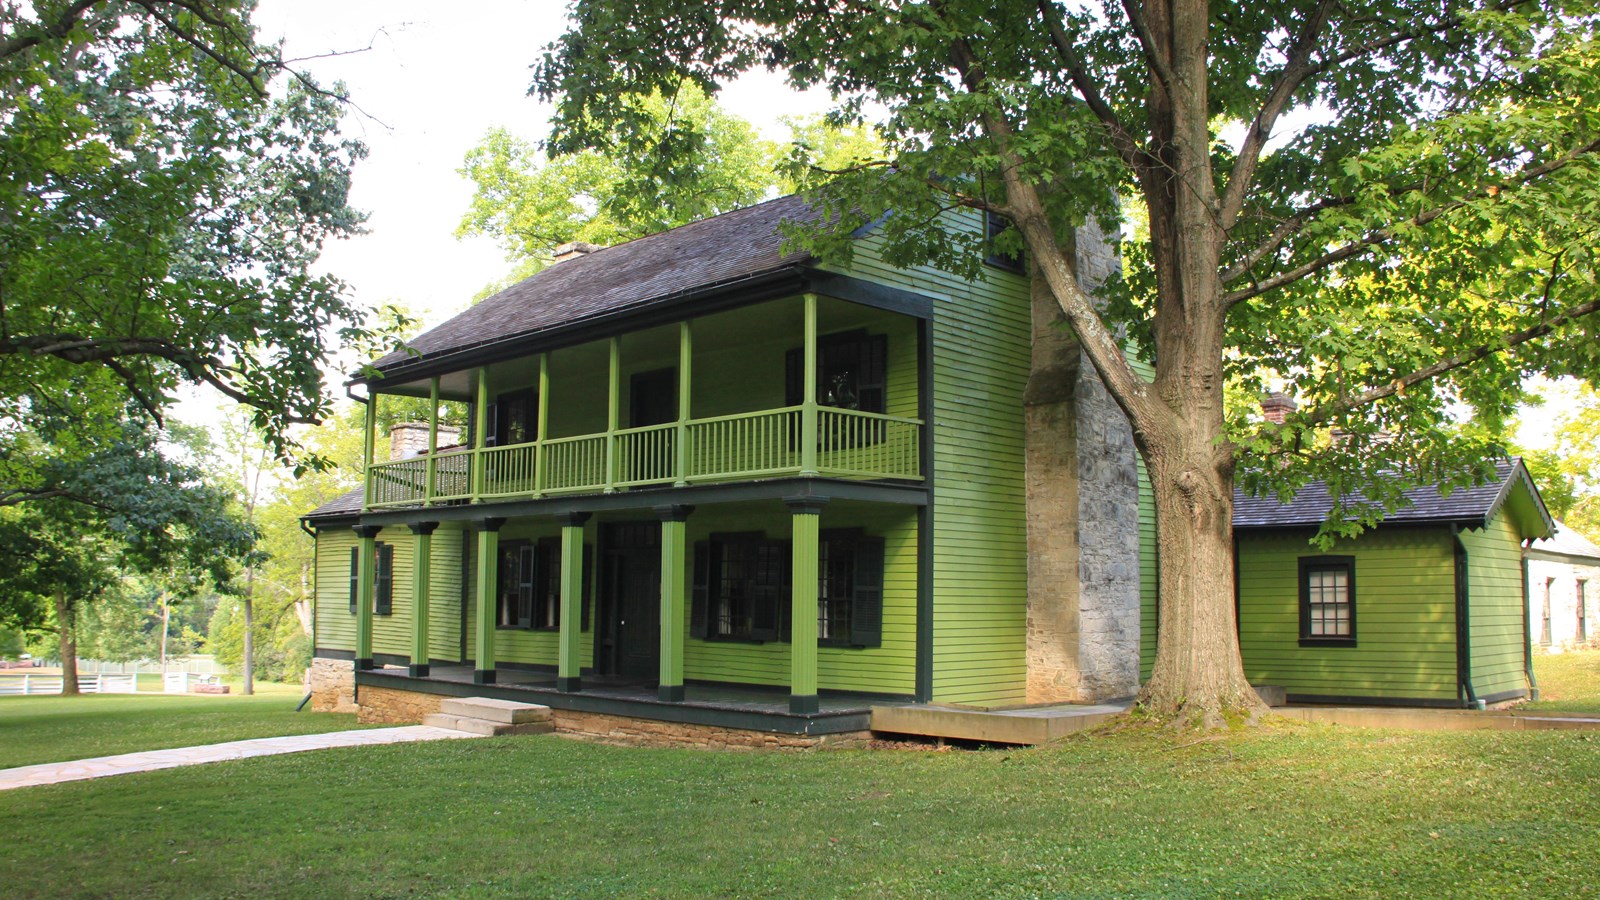 Photo of a bright green, two-story house with a two story front porch, situated among several trees